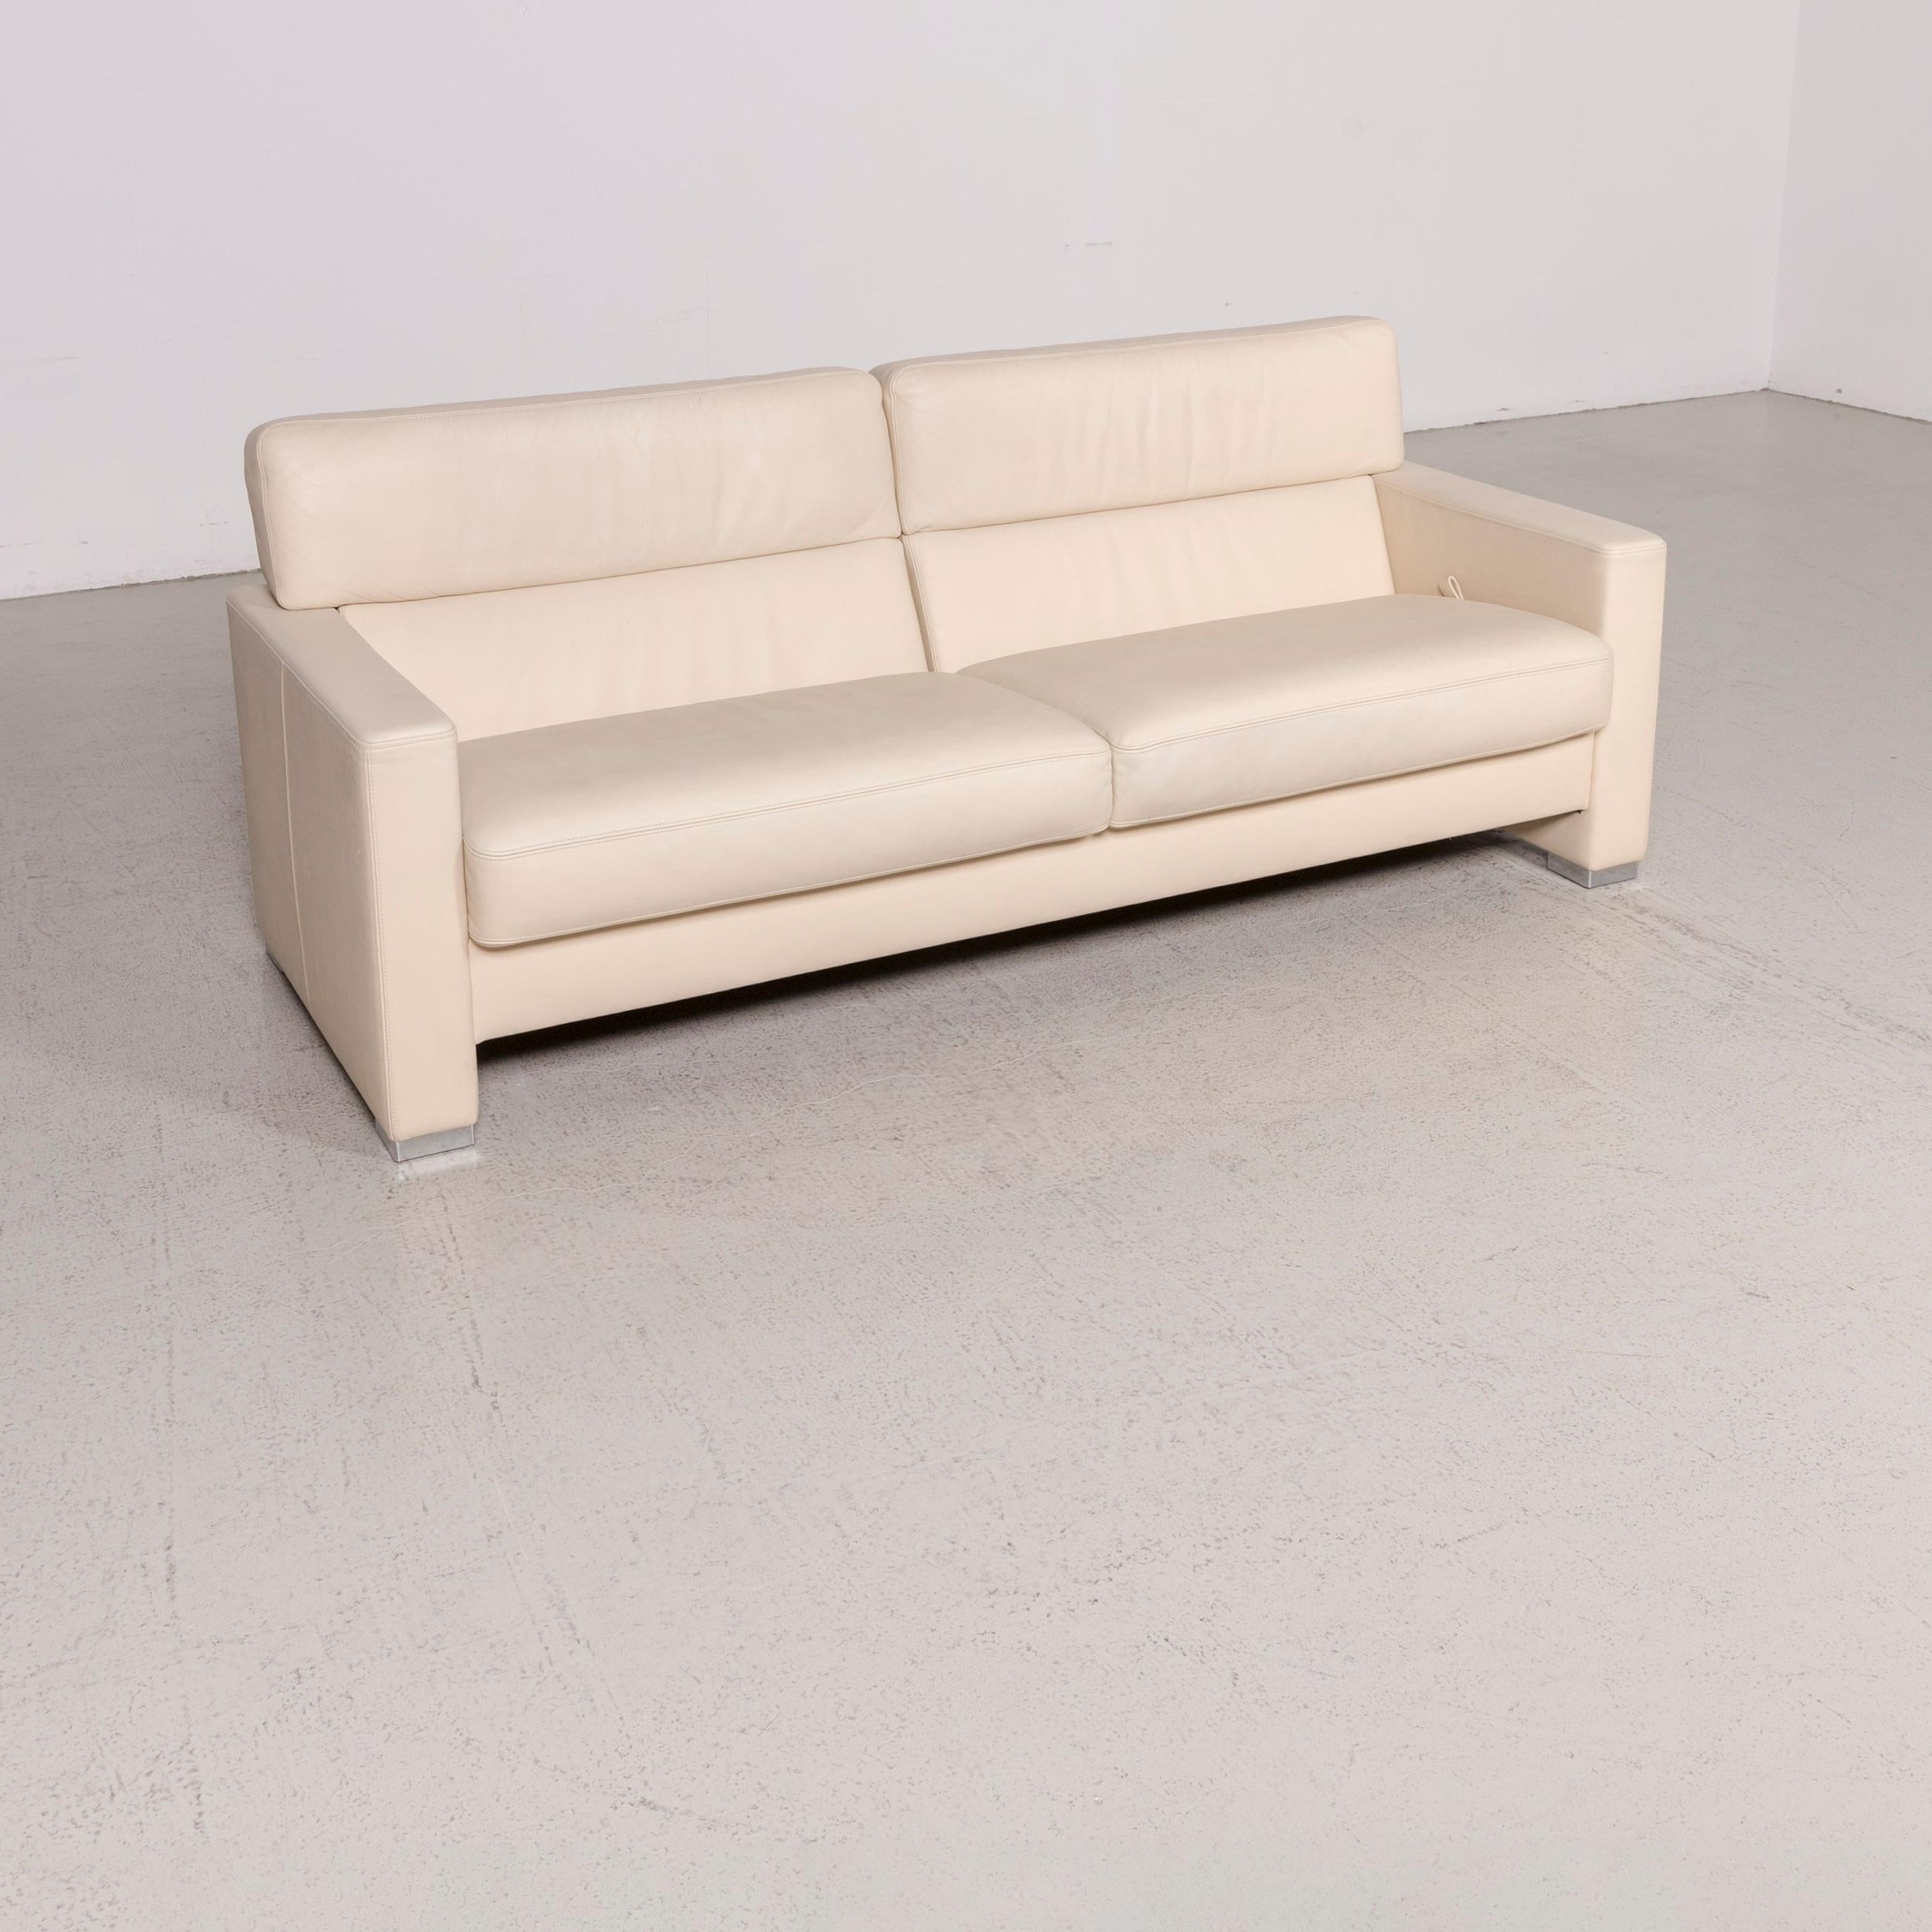 We bring to you a Brühl & Sippold designer leather sofa Beige three-seat real leather couch.

Product measurements in centimeters:

Depth 85
Width 200
Height 80
Seat-height 40
Rest-height 55
Seat-depth 50
Seat-width 170
Back-height 55.
  